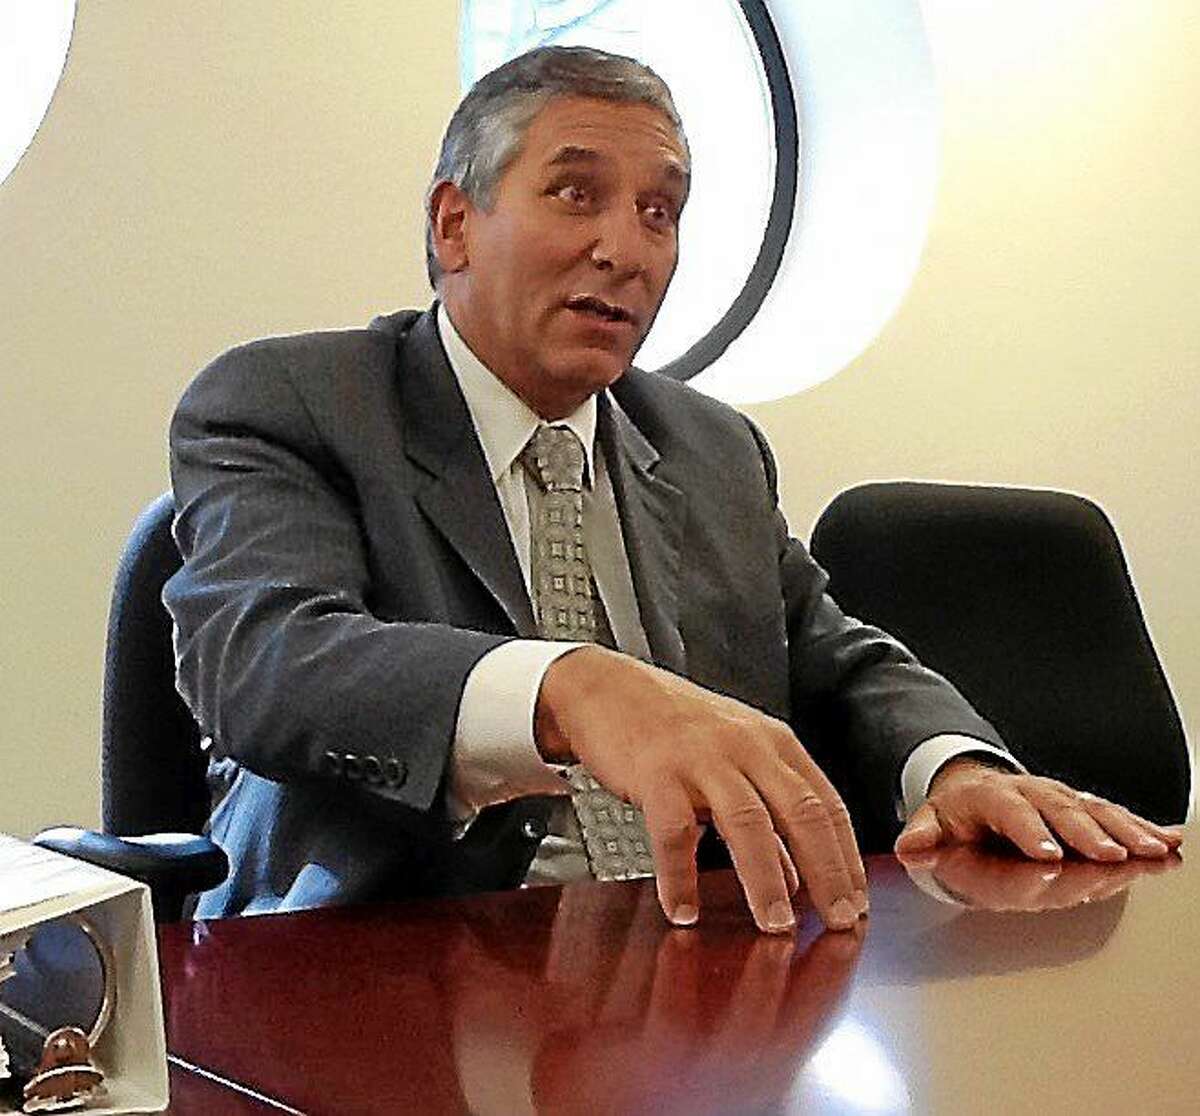 State Senate Minority Leader Len Fasano makes a point while speaking to the New Haven Register Editorial Board